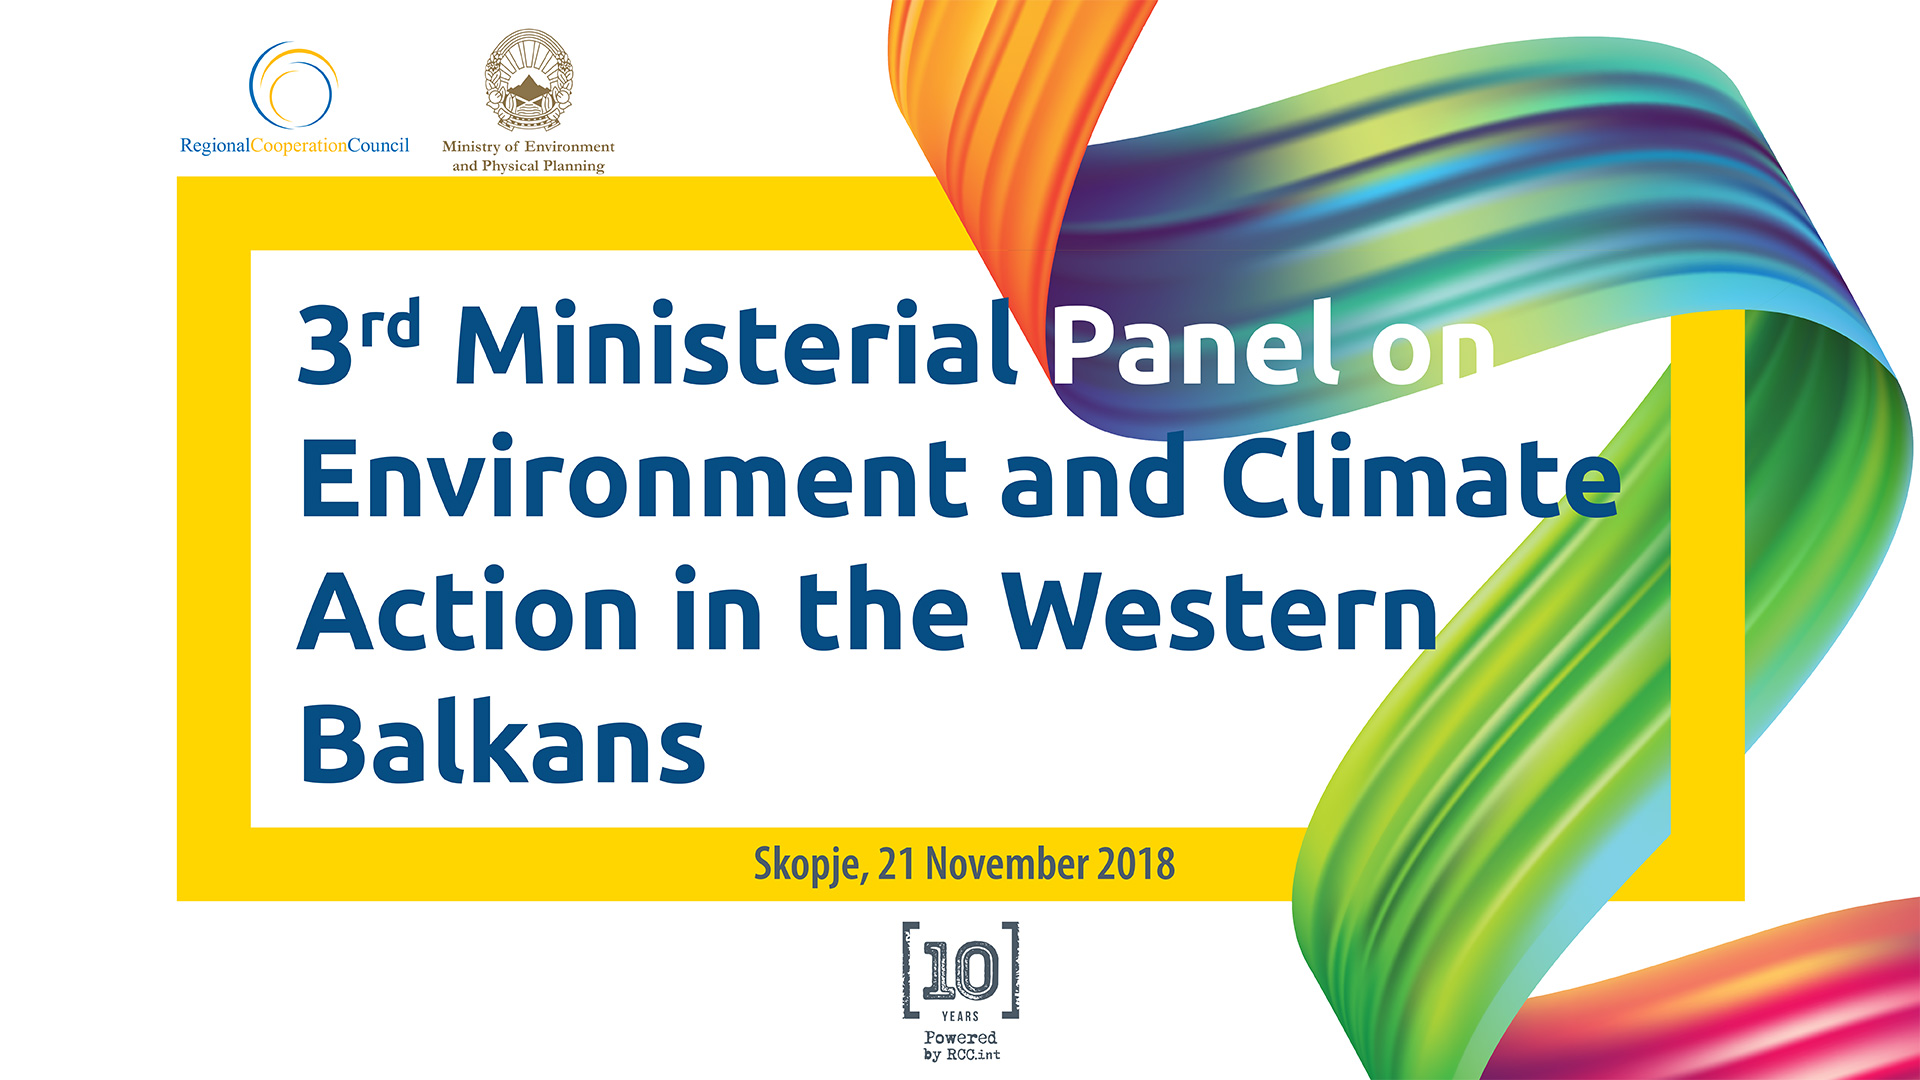 Skopje to host 3rd Ministerial Panel on Environment and Climate Action in the Western Balkans on 21 November 2018 (Illustration: RCC/Sejla Dizdarevic)